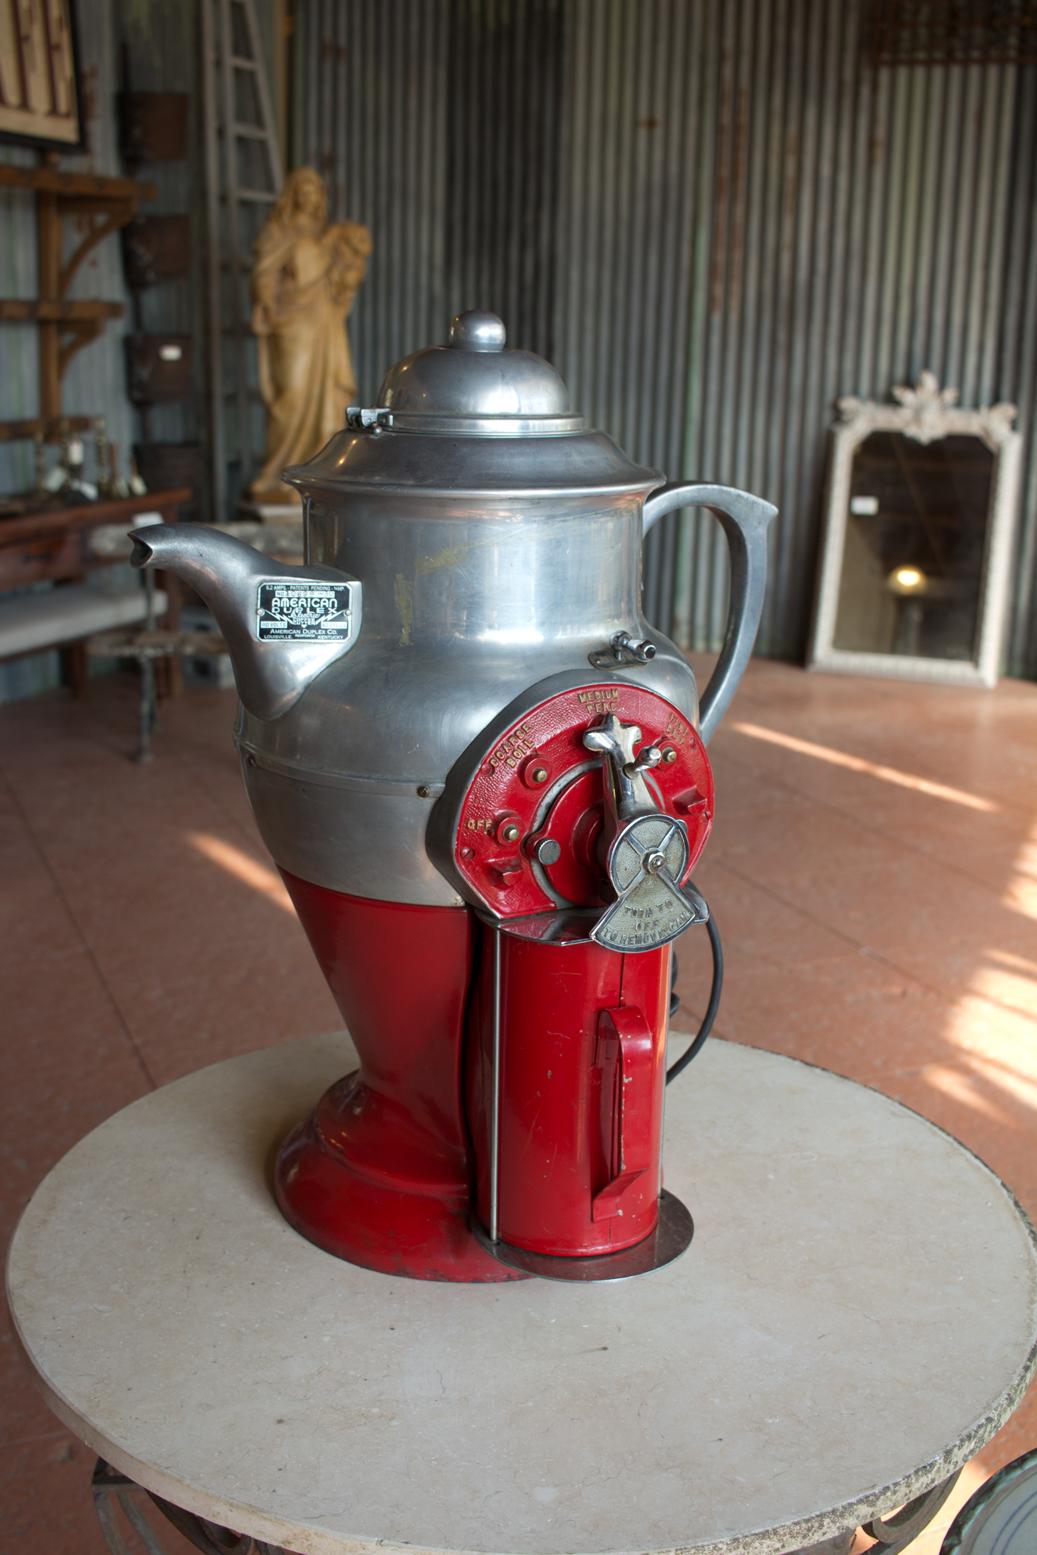 Wonderful 1930s iron and chrome commercial coffee grinder in the shape of a coffee pot, by American Duplex Co. from Louisville, Kentucky. Original red paint.